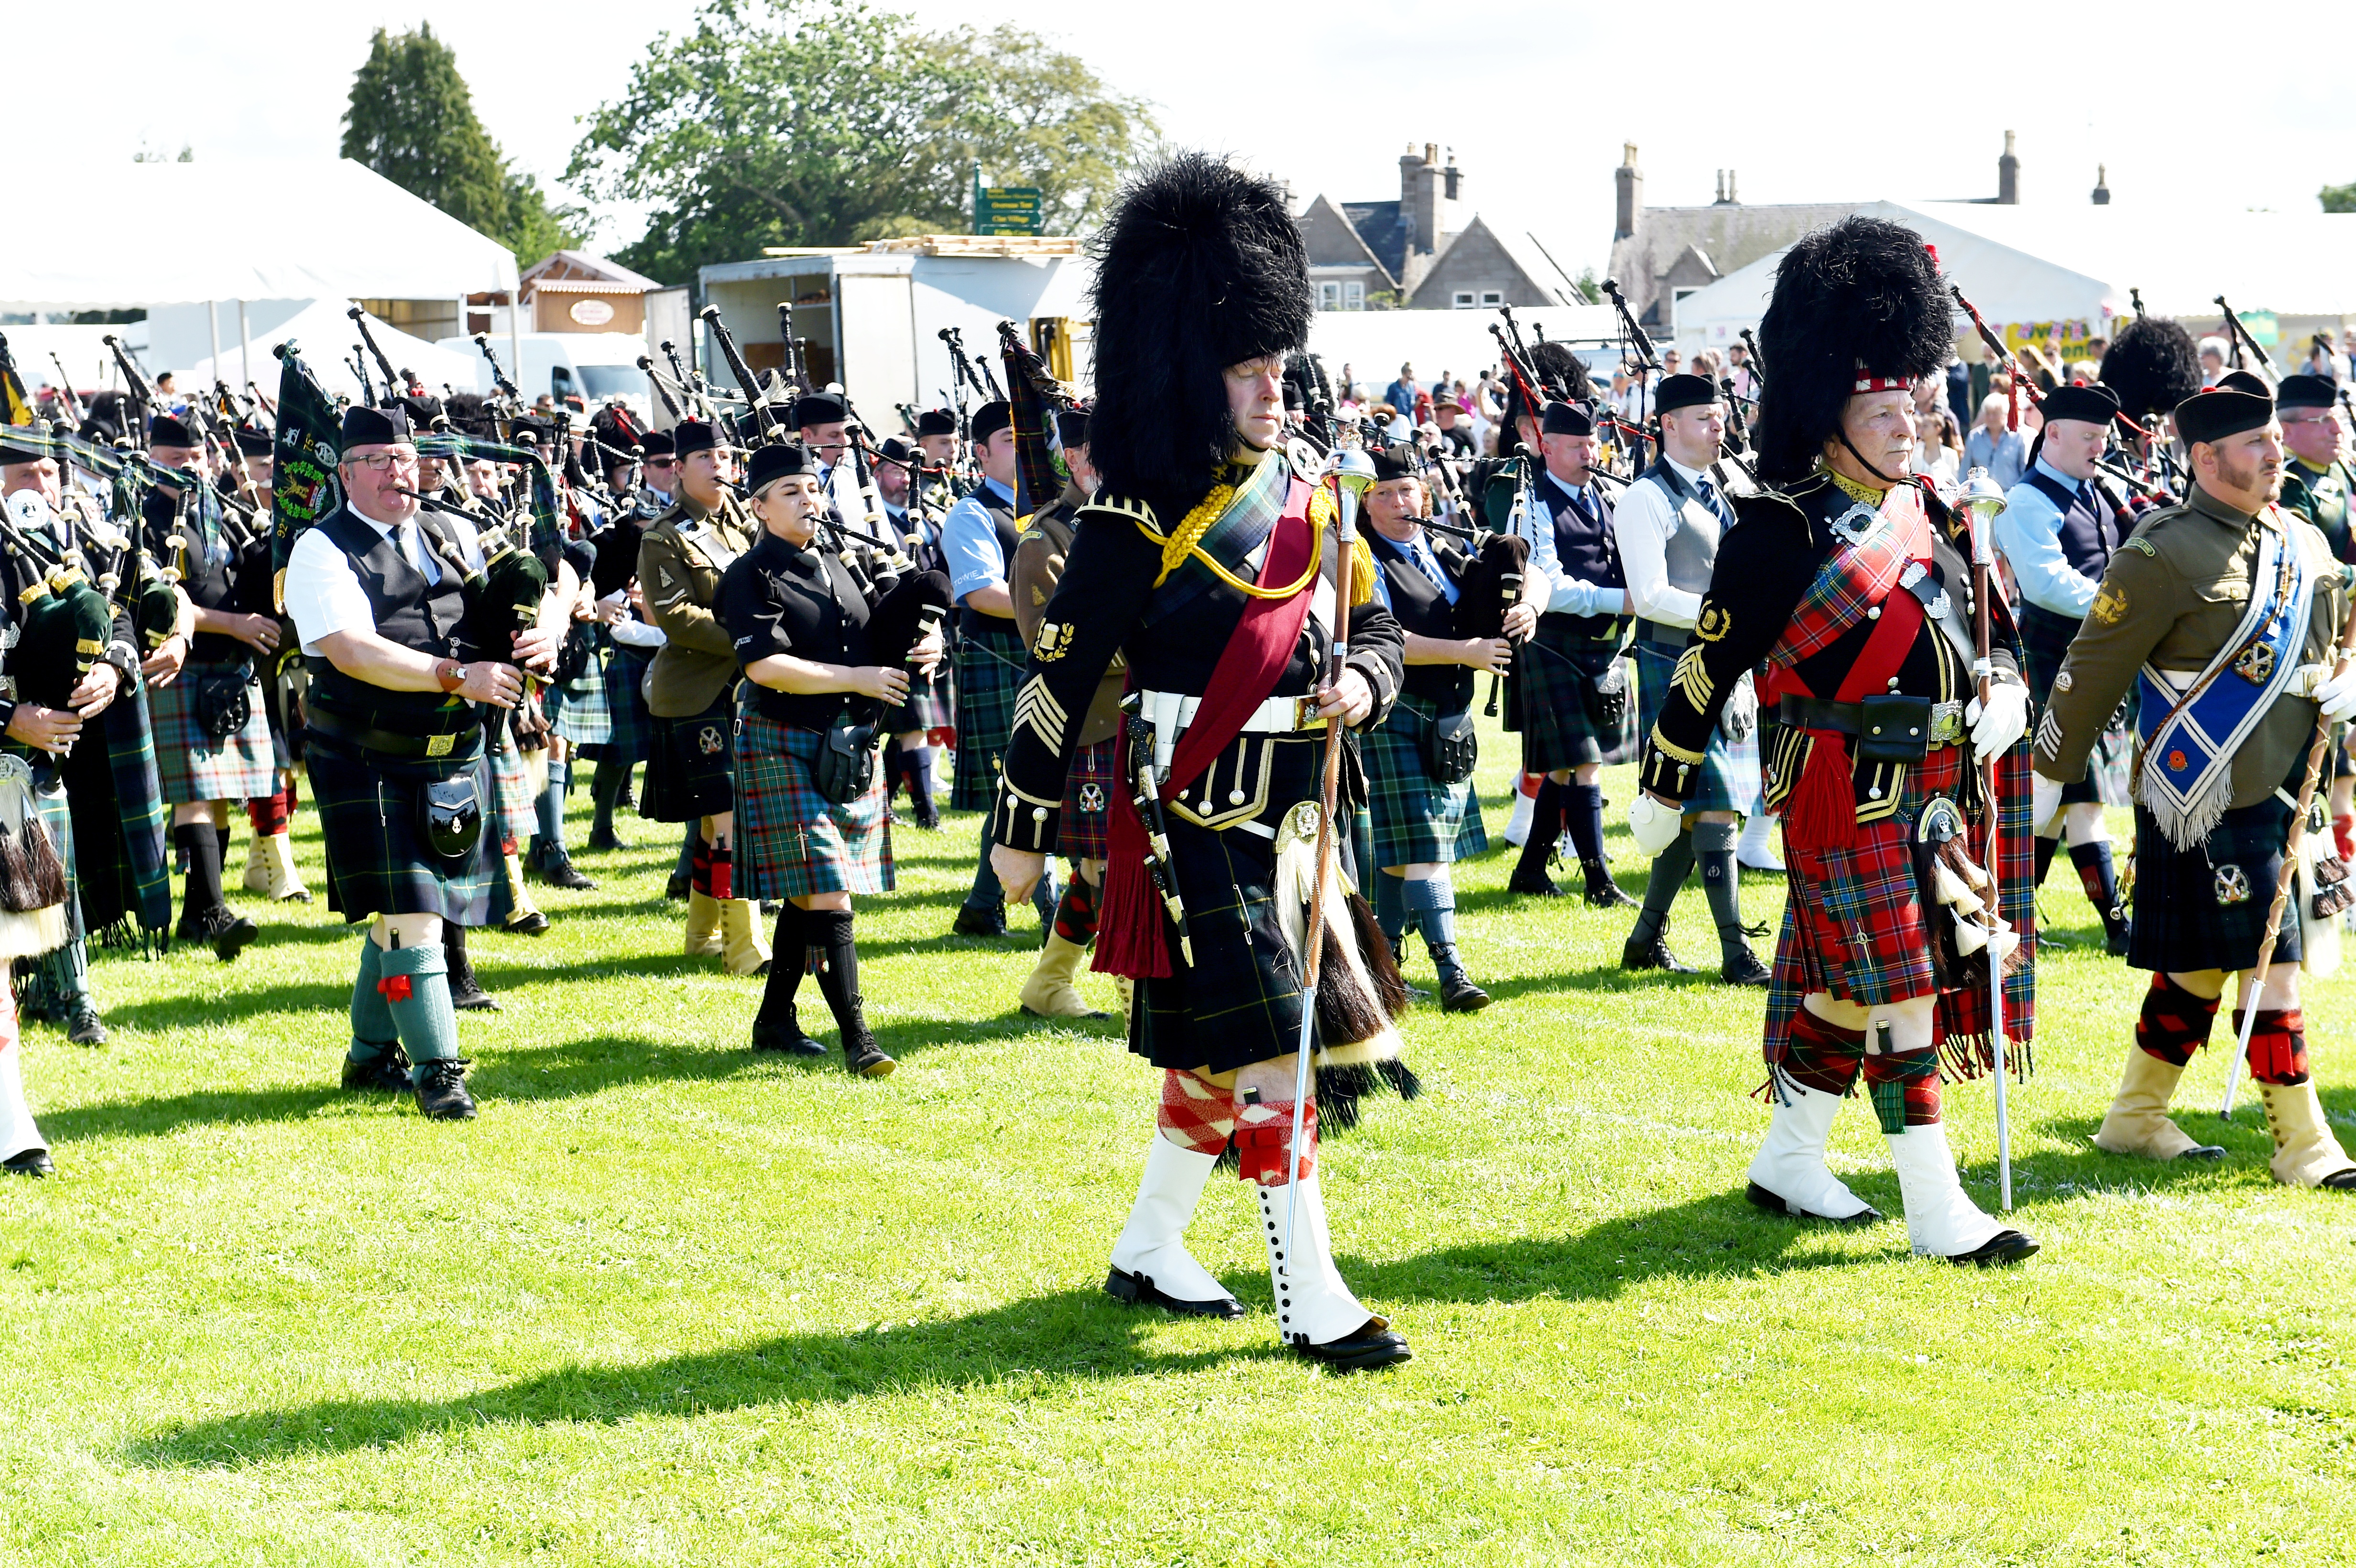 Mass Pipe Bands at the Aboyne Highland Games 2019
Picture by COLIN RENNIE